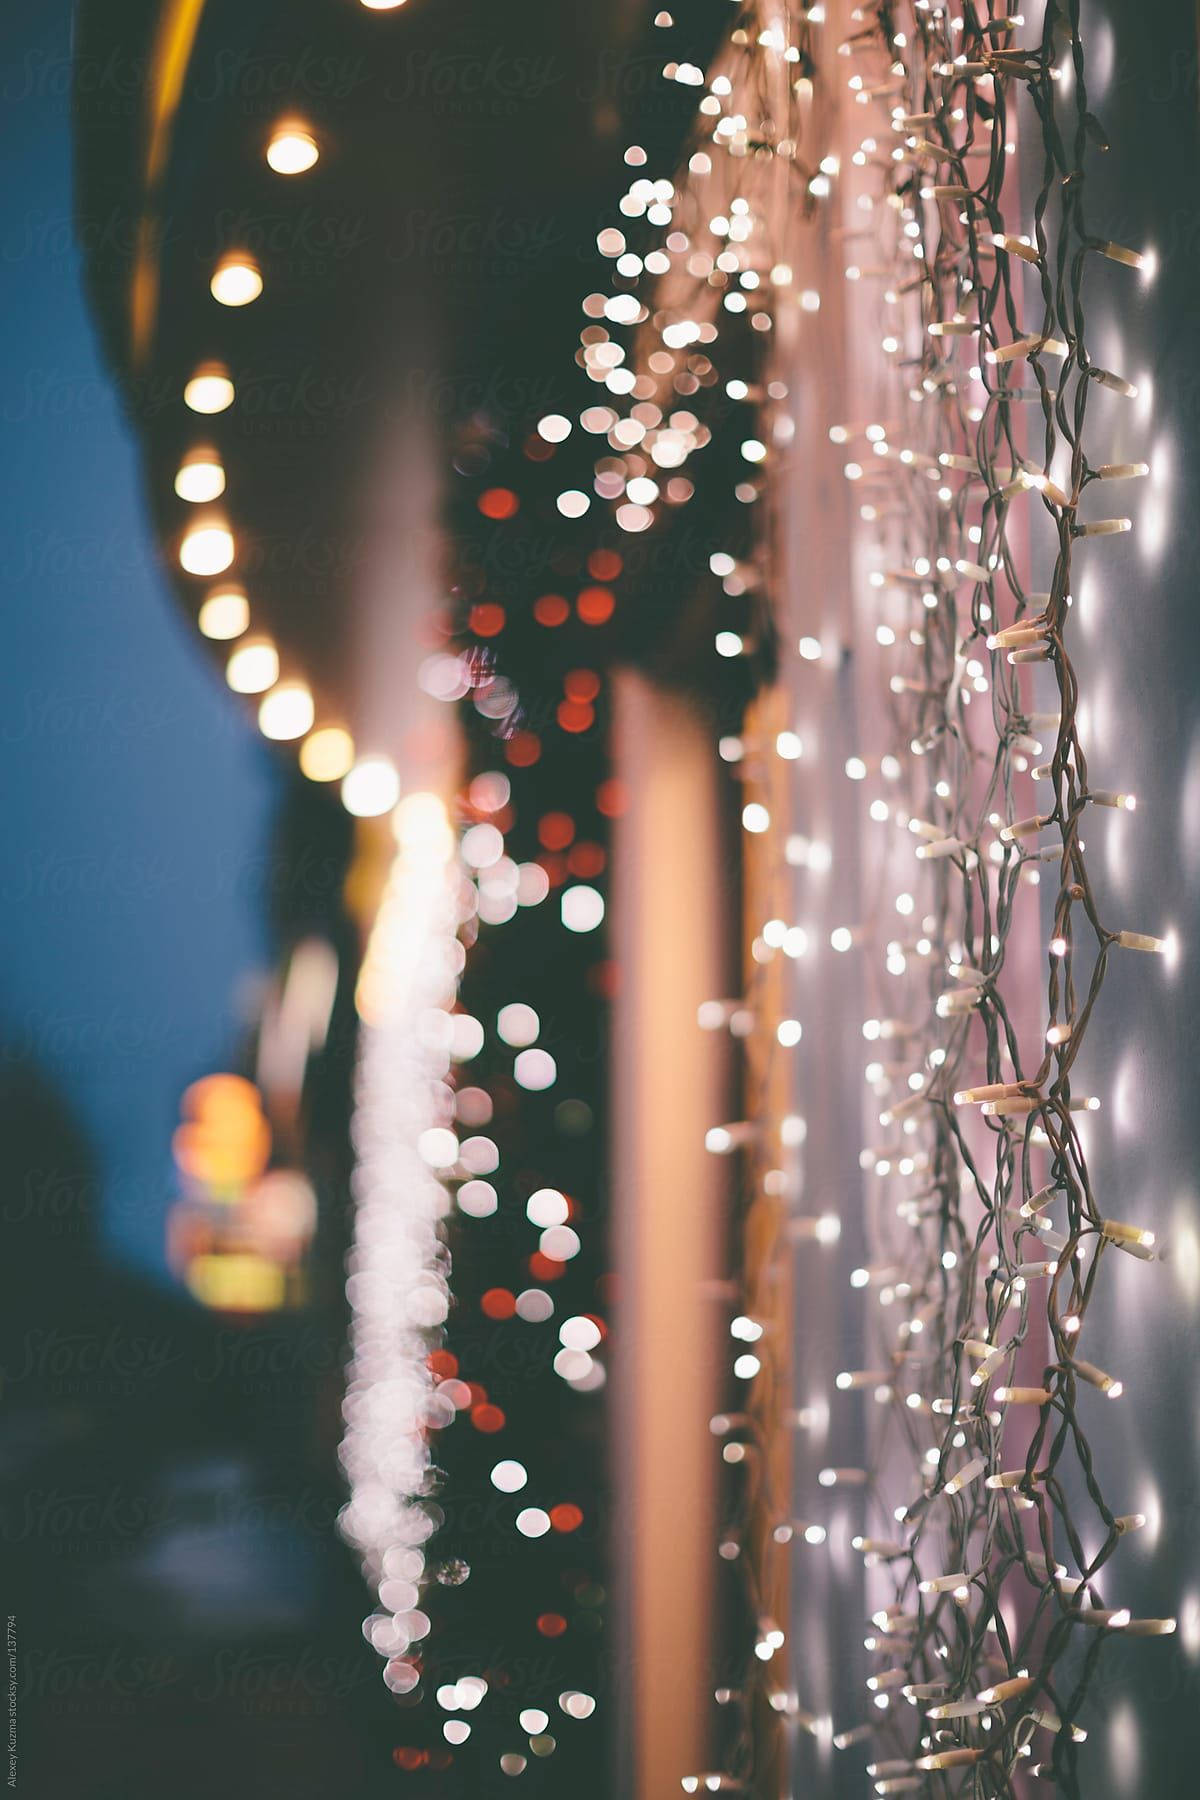 A perfect harmony of beauty and spirit - Christmas lights adorn the night. Wallpaper